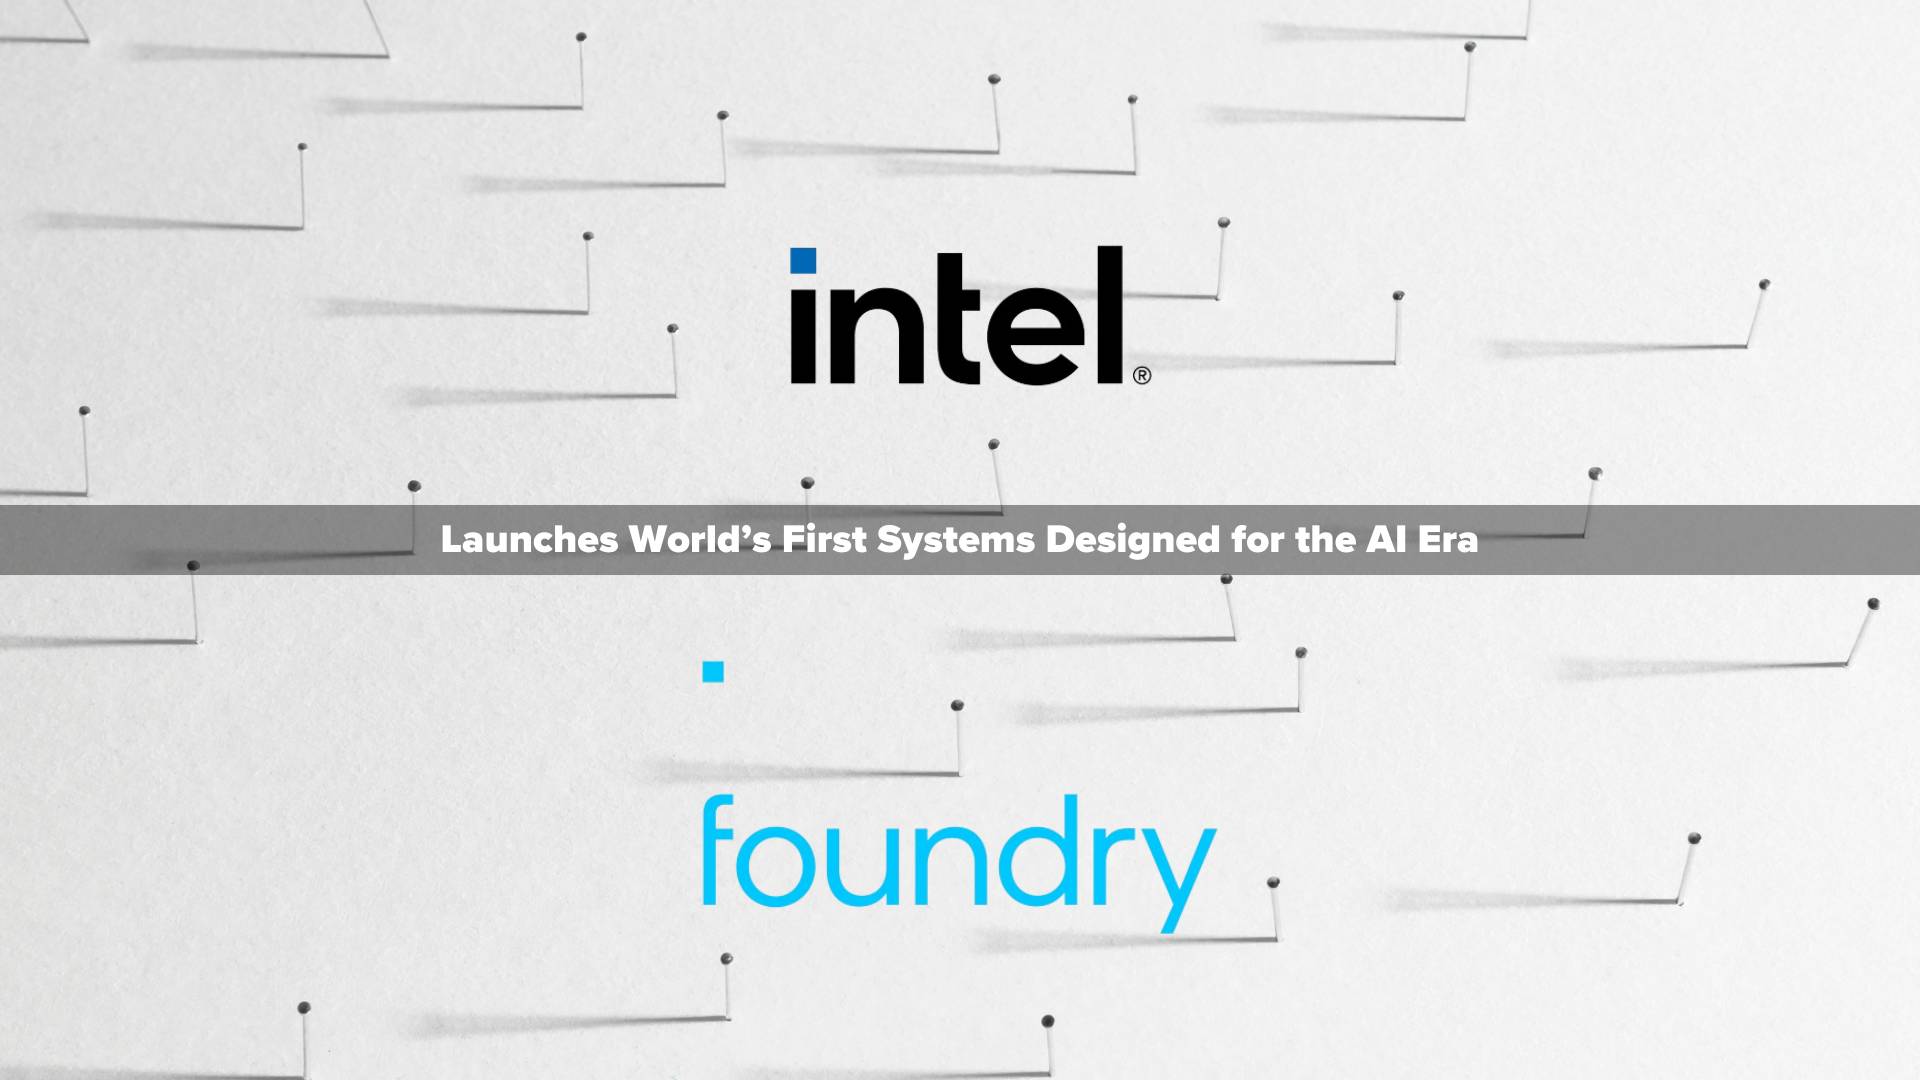 Intel Launches World’s First Systems Foundry Designed for the AI Era